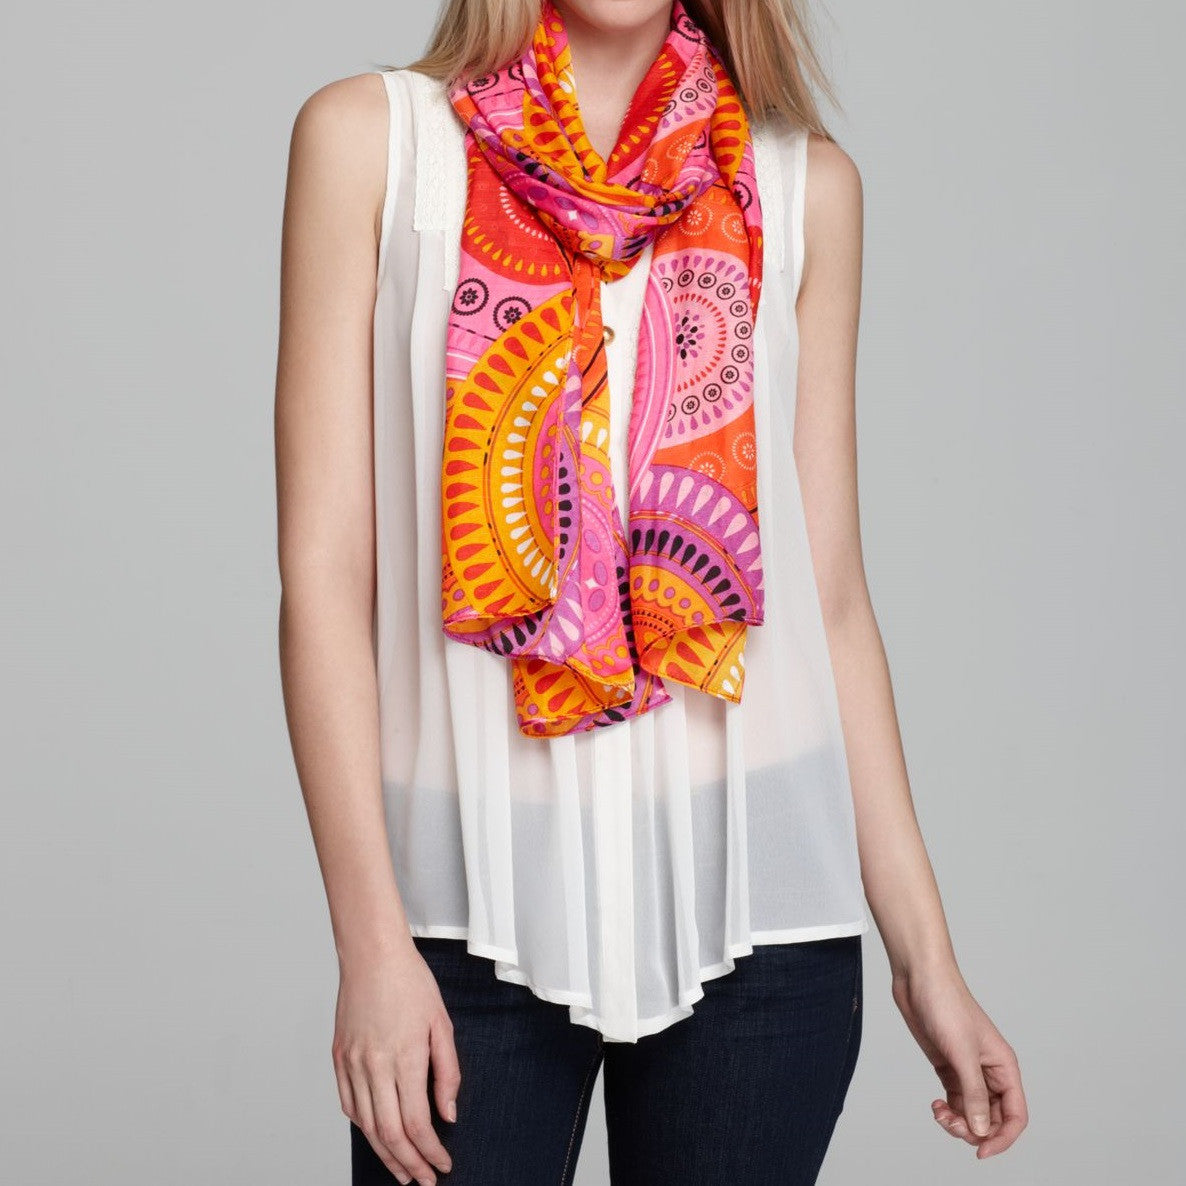 Echo Orange/Pink Printed Scarf Add a pop of color to your look